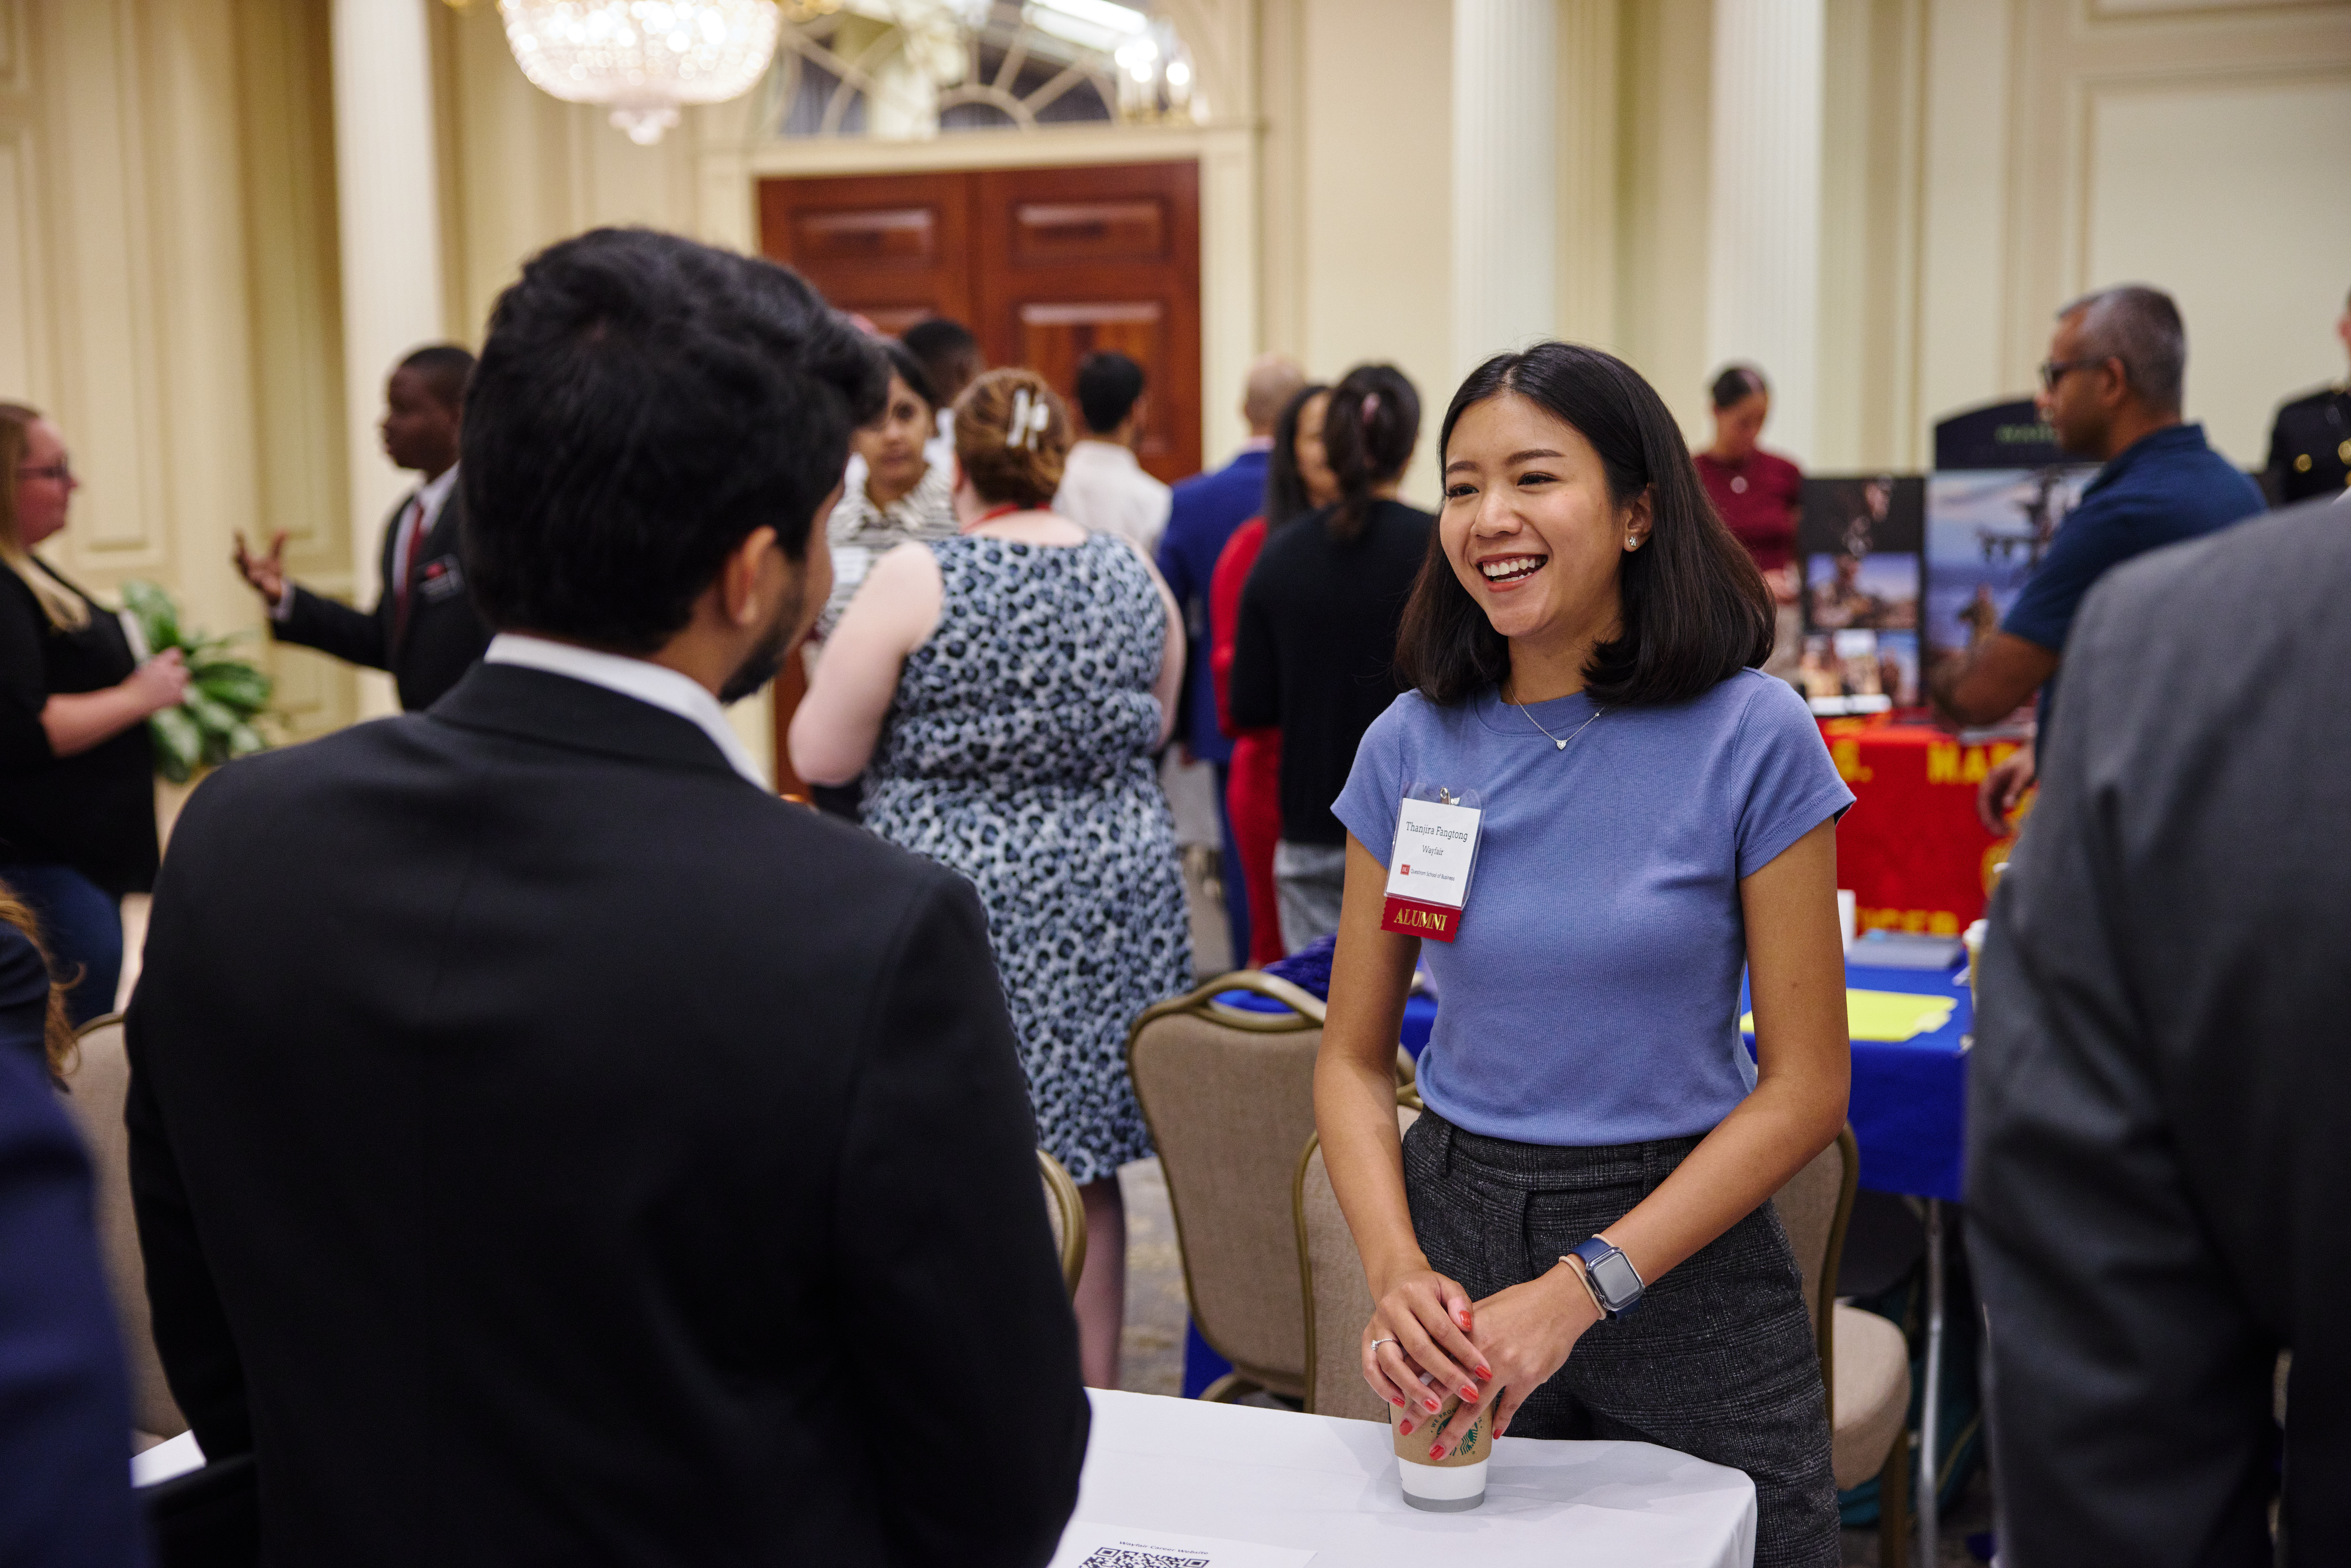 A student speaks with an employer at a career fair